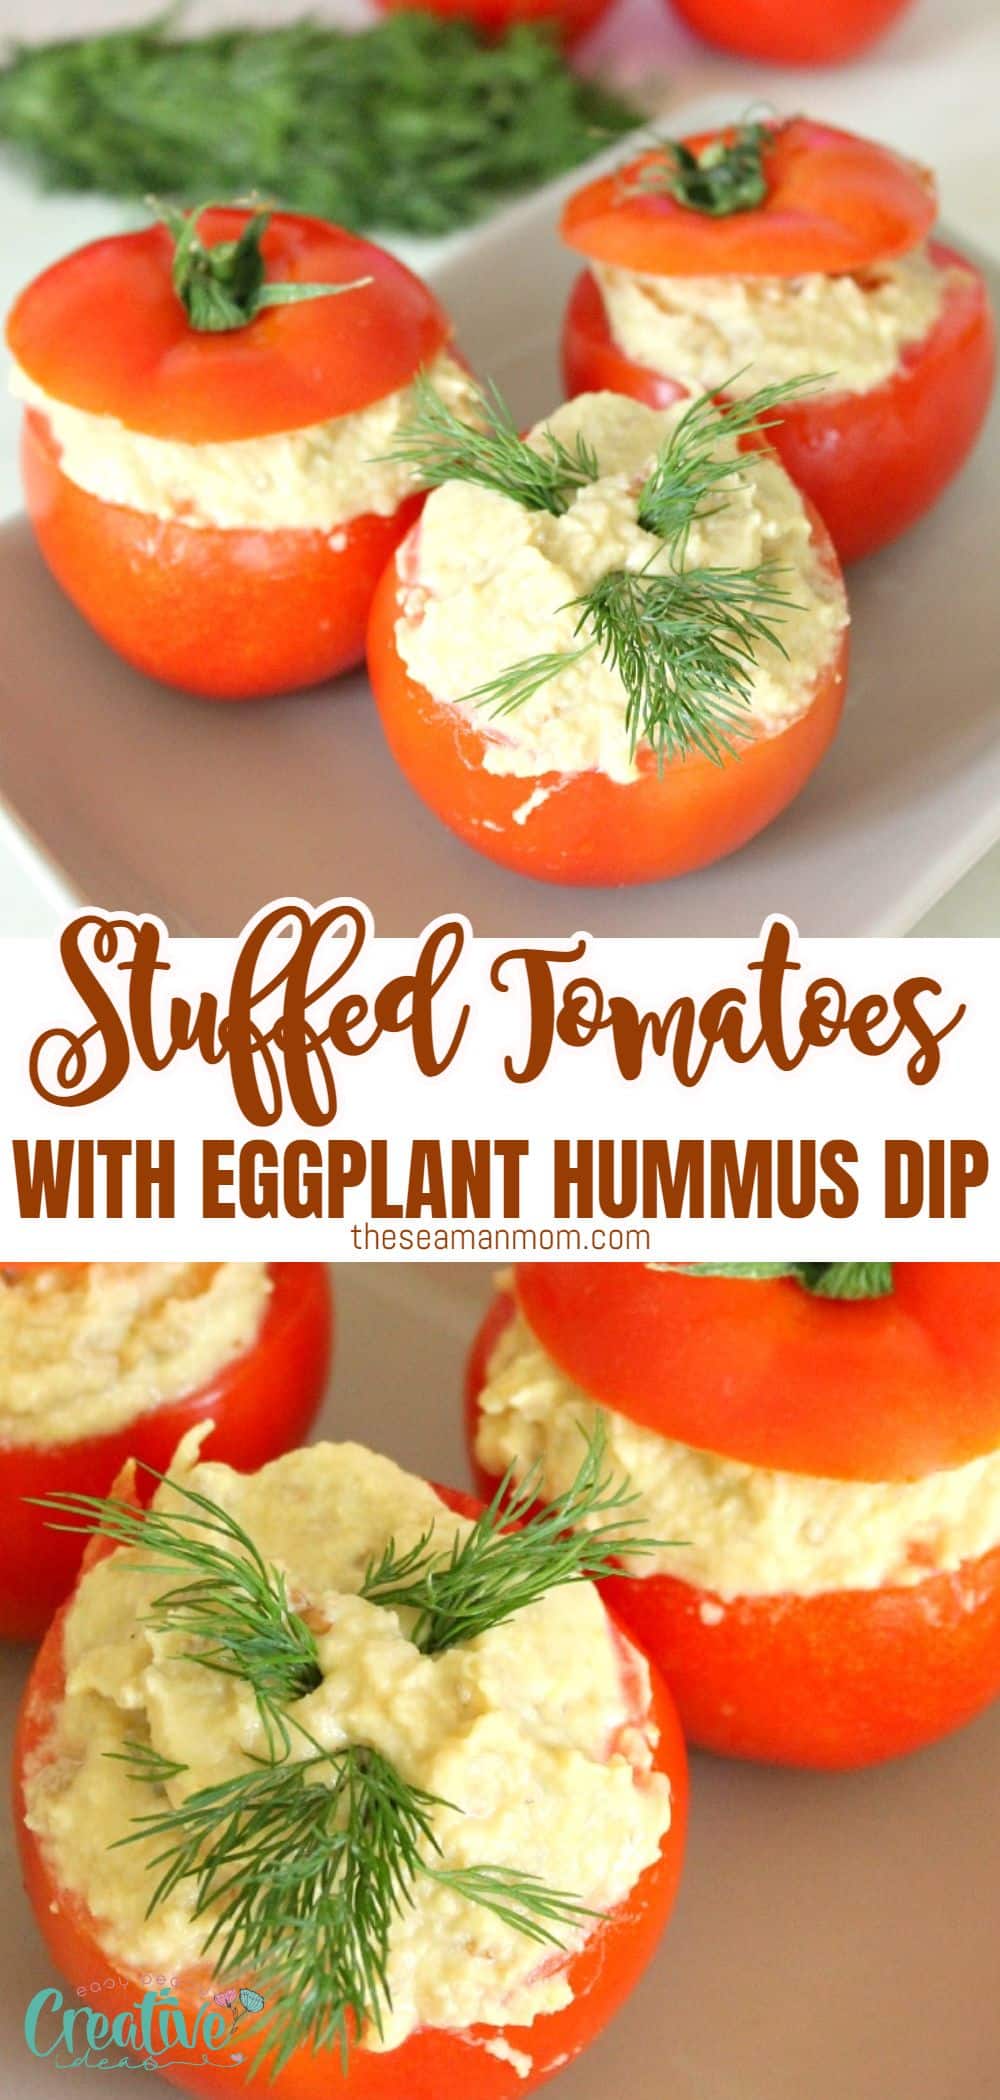 If you're searching for a filling and quick vegetarian snack or a simple yet fancy appetizer, give this delectable recipe for stuffed tomatoes a try. The dish features delicious fresh tomatoes filled with eggplant and hummus dip, and your guests will undoubtedly be impressed! via @petroneagu